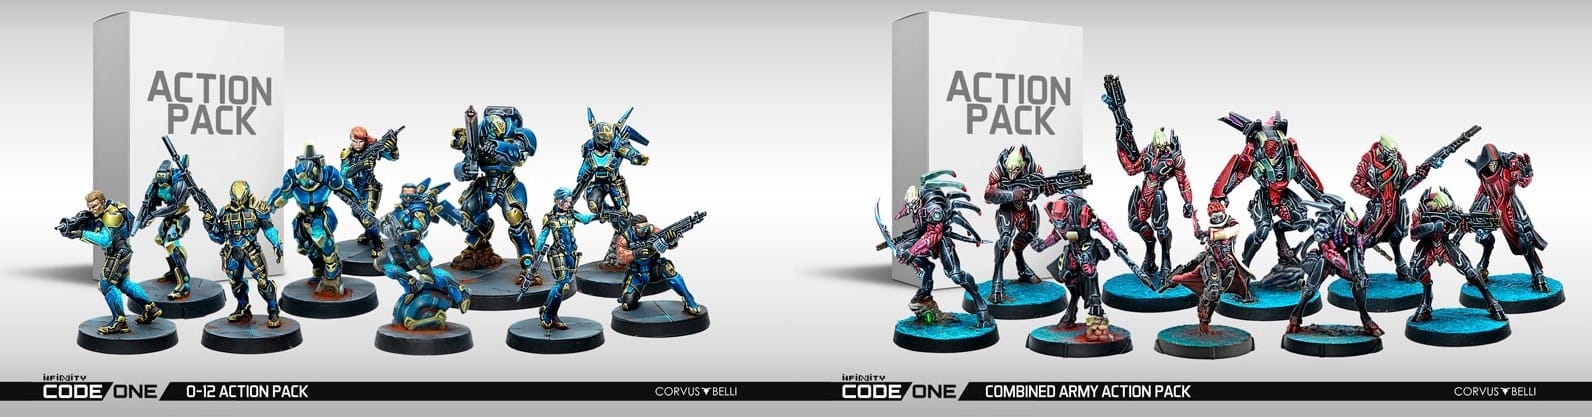 The Combined Army and O-12 action packs for CodeOne.